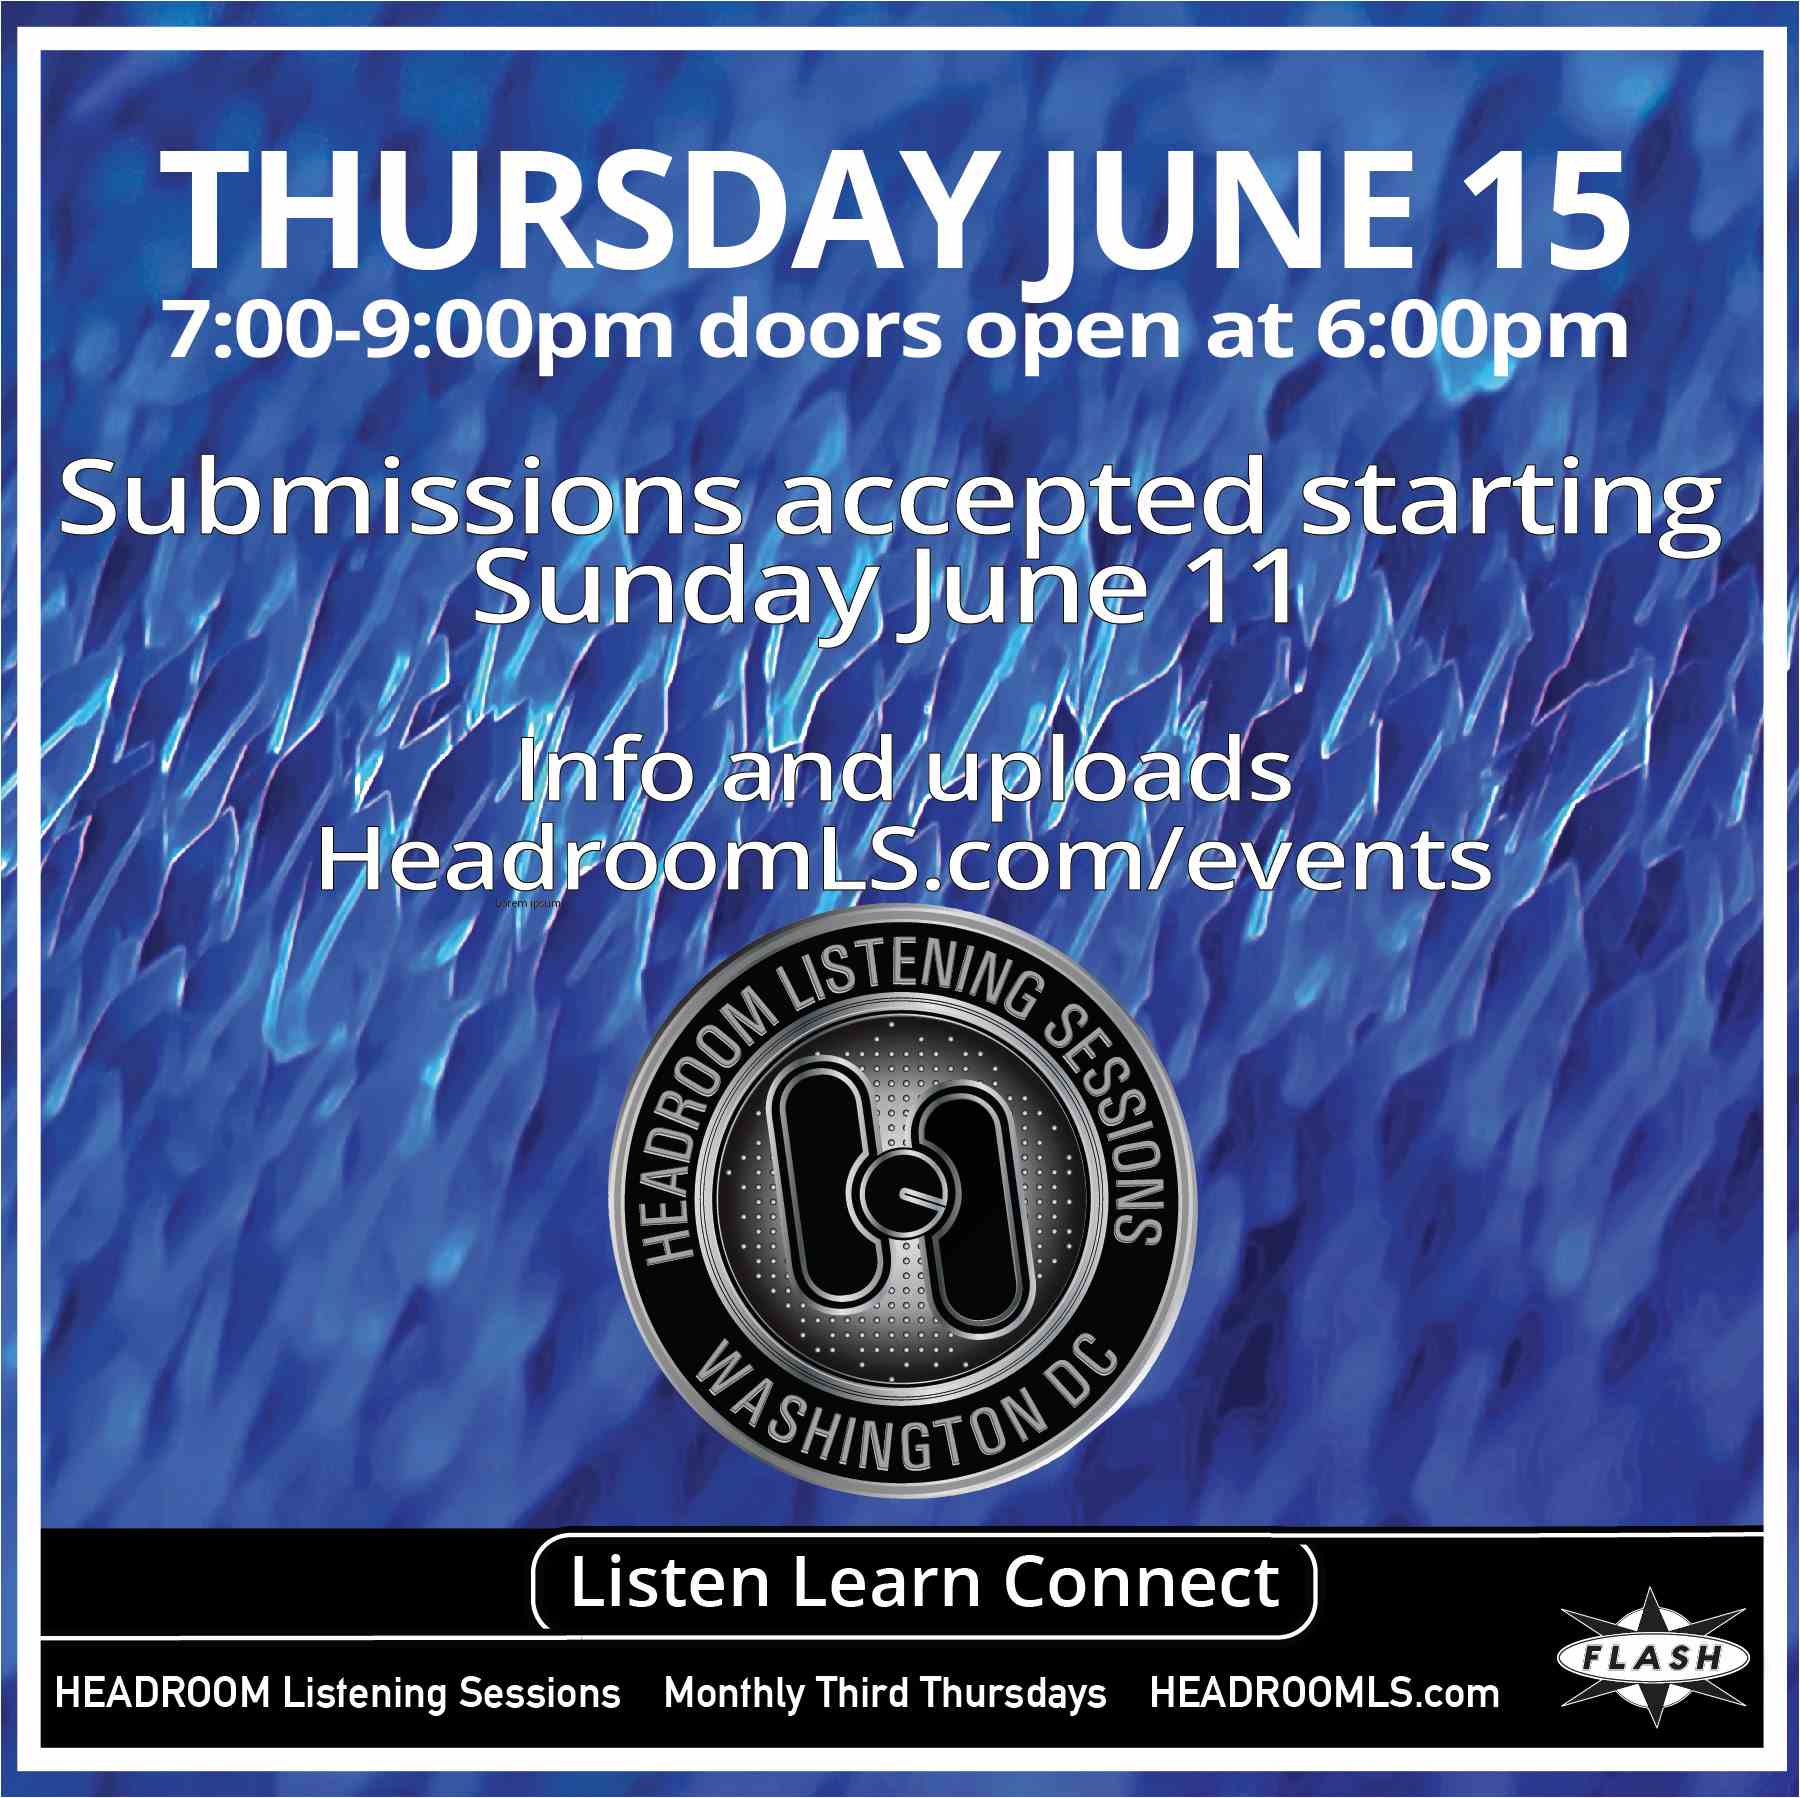 Headroom Listening Sessions event flyer